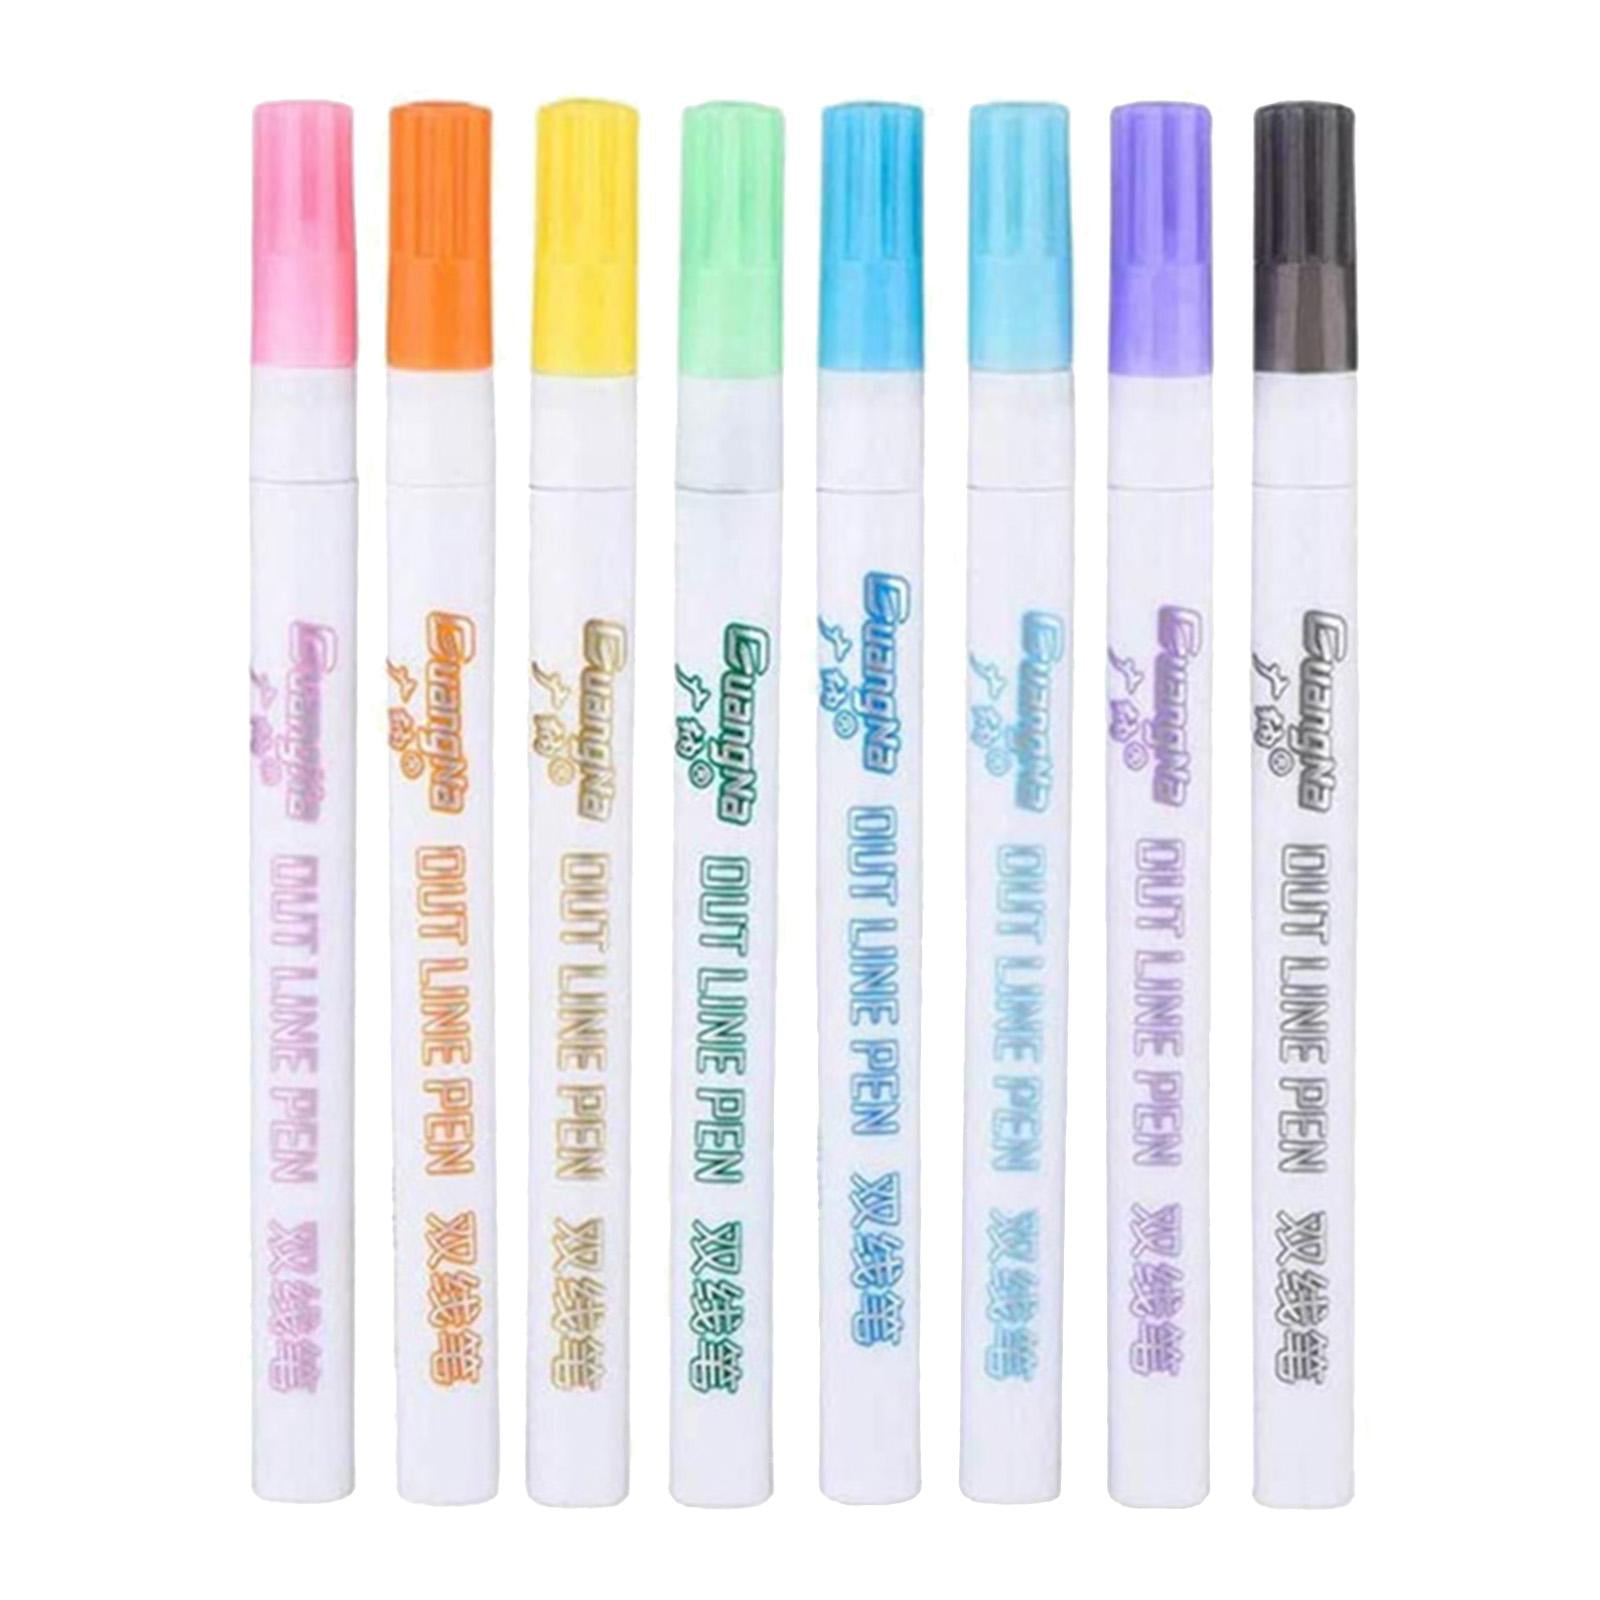 8 Pcs/Set Marker Pen Magic Double Line Outline Art Drawing Pens Gift Card Writing Stationery for Journaling Doodling Scribbling Planning Highlighting